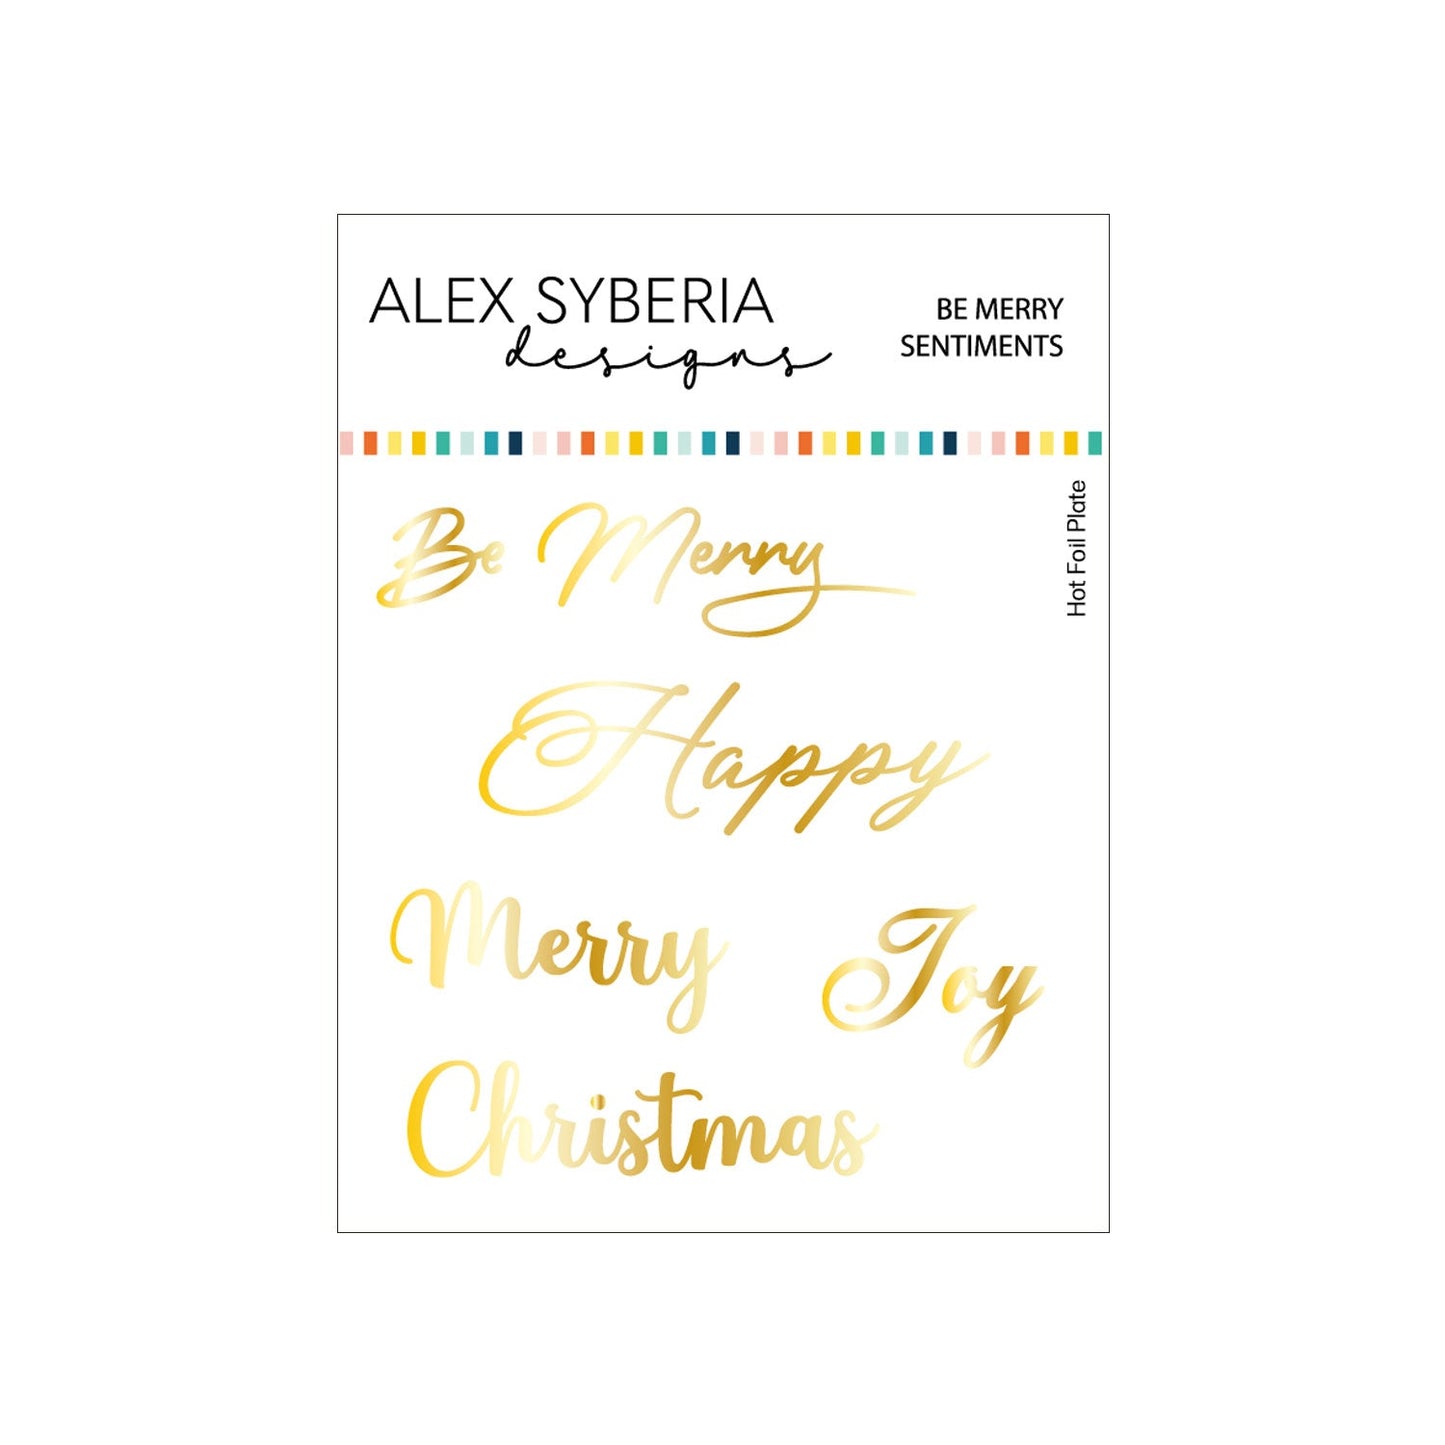 alex-syberia-designs-be-merry-sentiments-dies-hot-foil-plates-cardmaking-winter-christmas-sentiments-scrapbooking-mixed-media-diecutting-joy-words-die-set-happy-new-year-handmadecards-scrapbooking-layout-diecutting-merry-christmas-foiling-slimline-cards-blog-ideas-tutorial